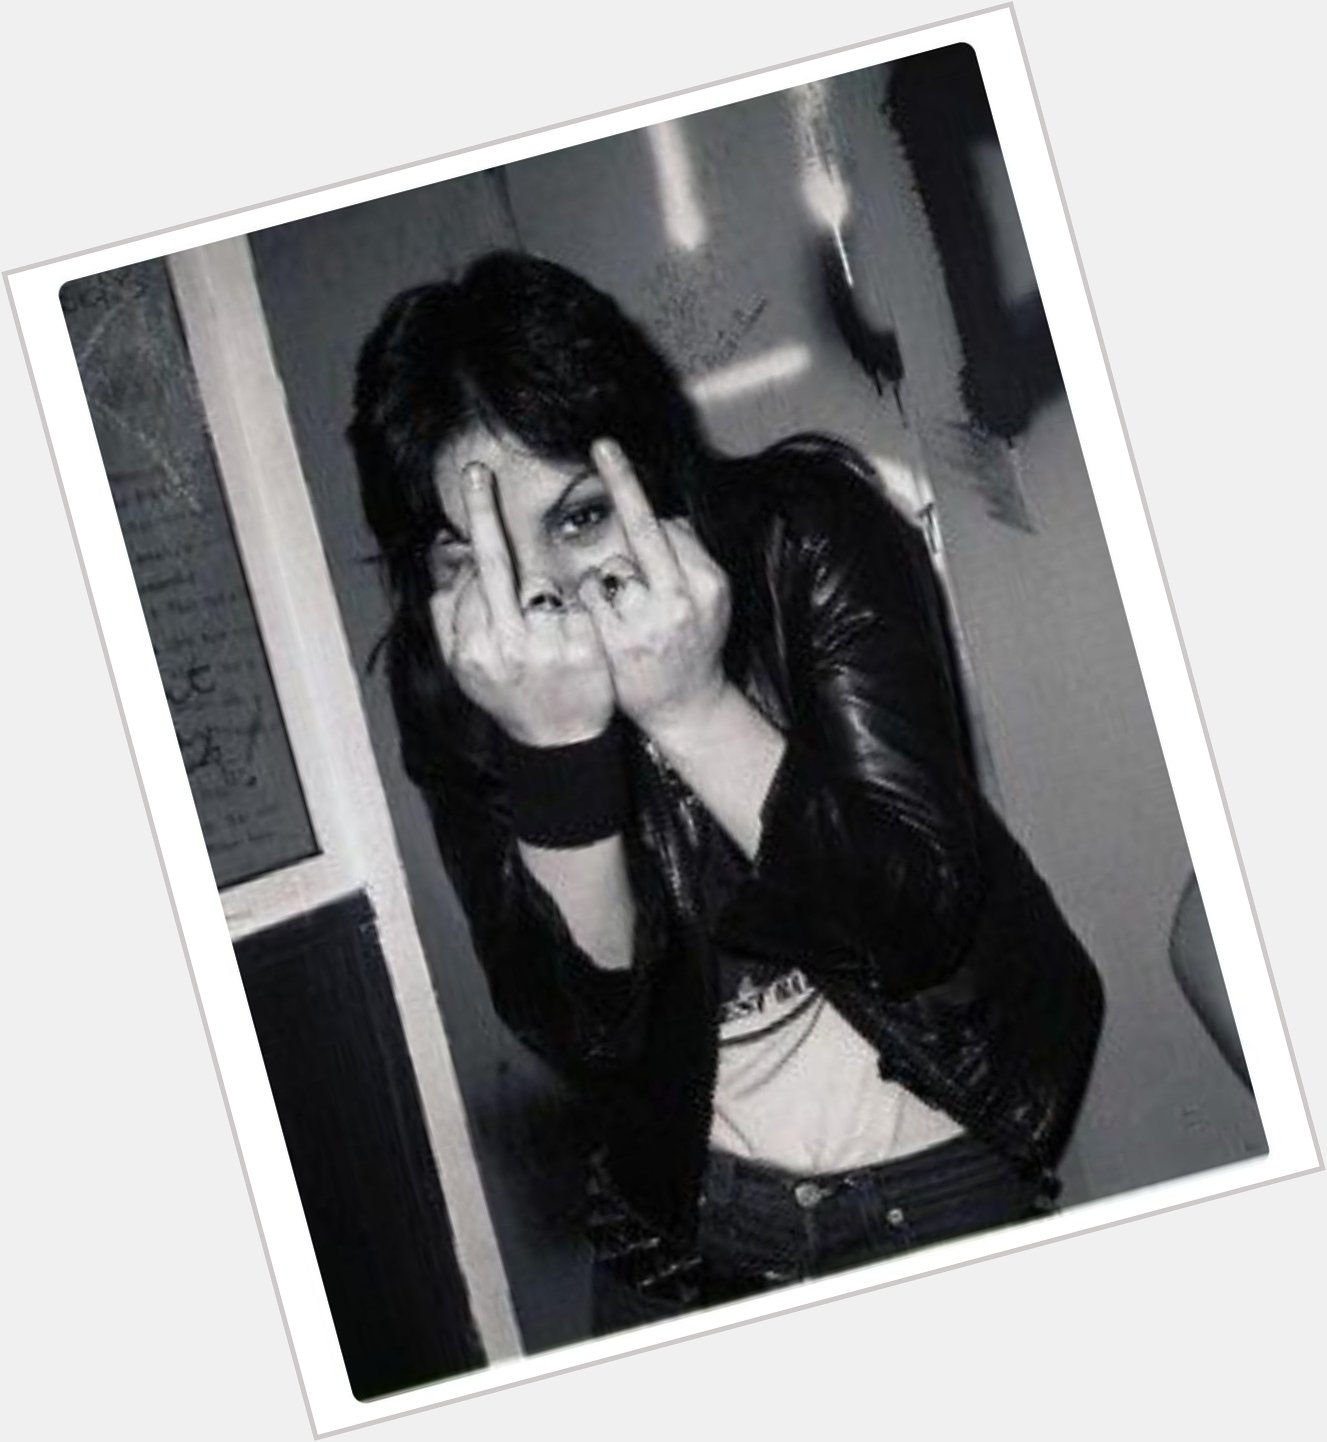 \" I Don\t Give A Damn About My Bad Reputation \" - Joan Jett Happy Birthday Pirate Queen  